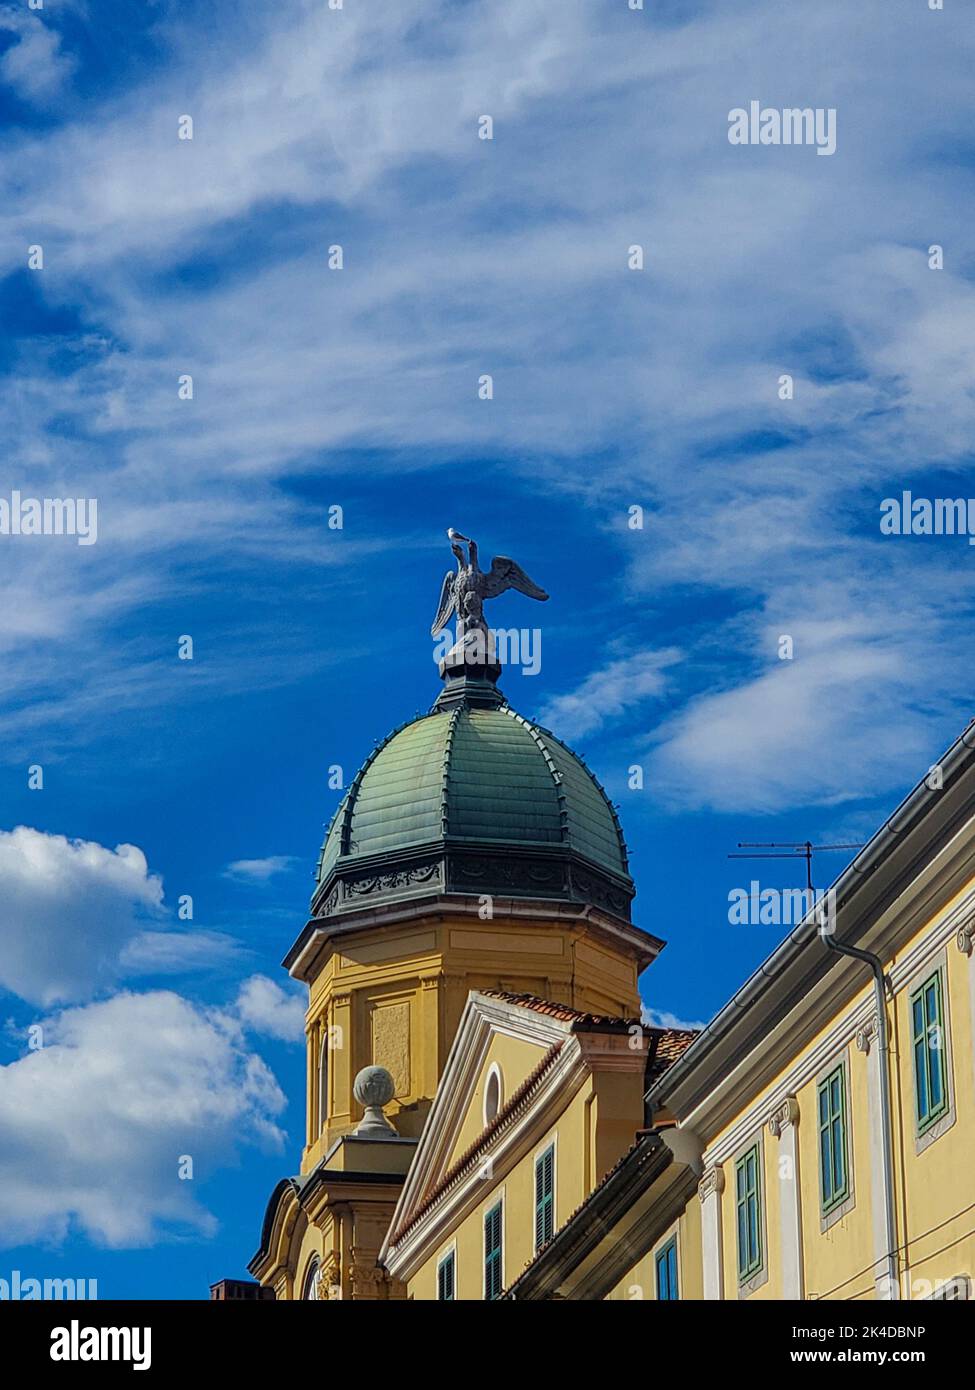 The baroque clock tower with domed roof and sculpture of the two-headed eagle in Rijeka, Croatia Stock Photo